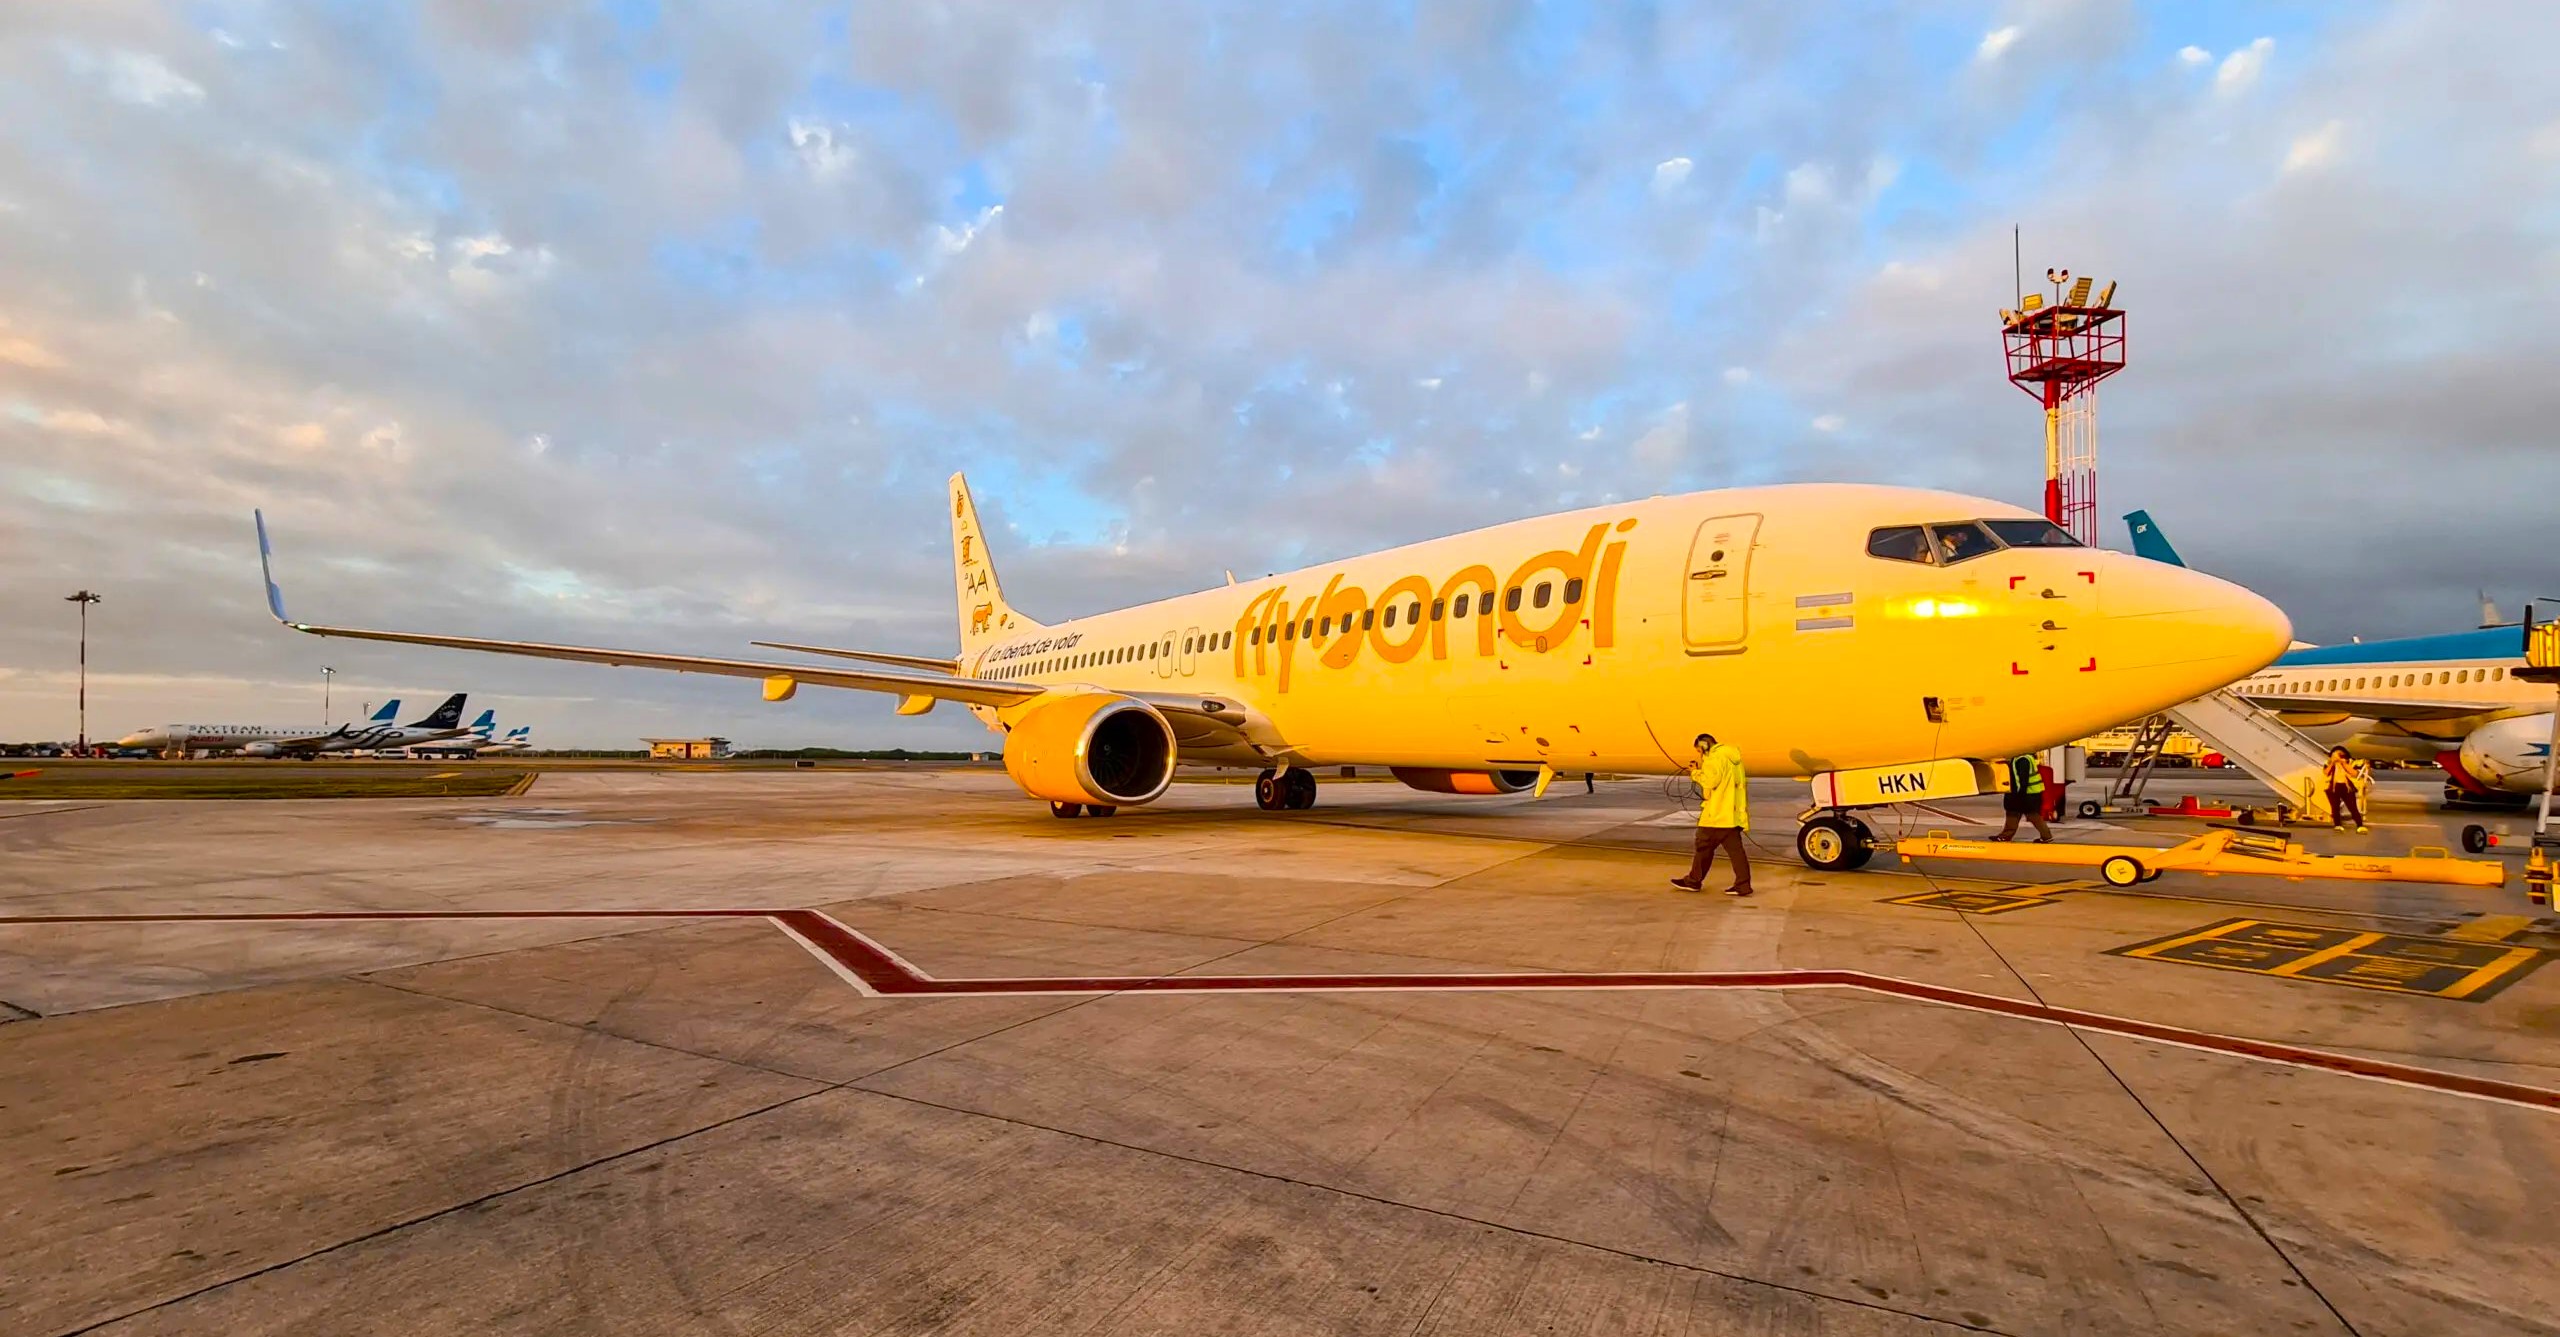 “Hostages of a Union”, Flybondi had to move its operation to Ezeiza due to forceful measures at Aeroparque.